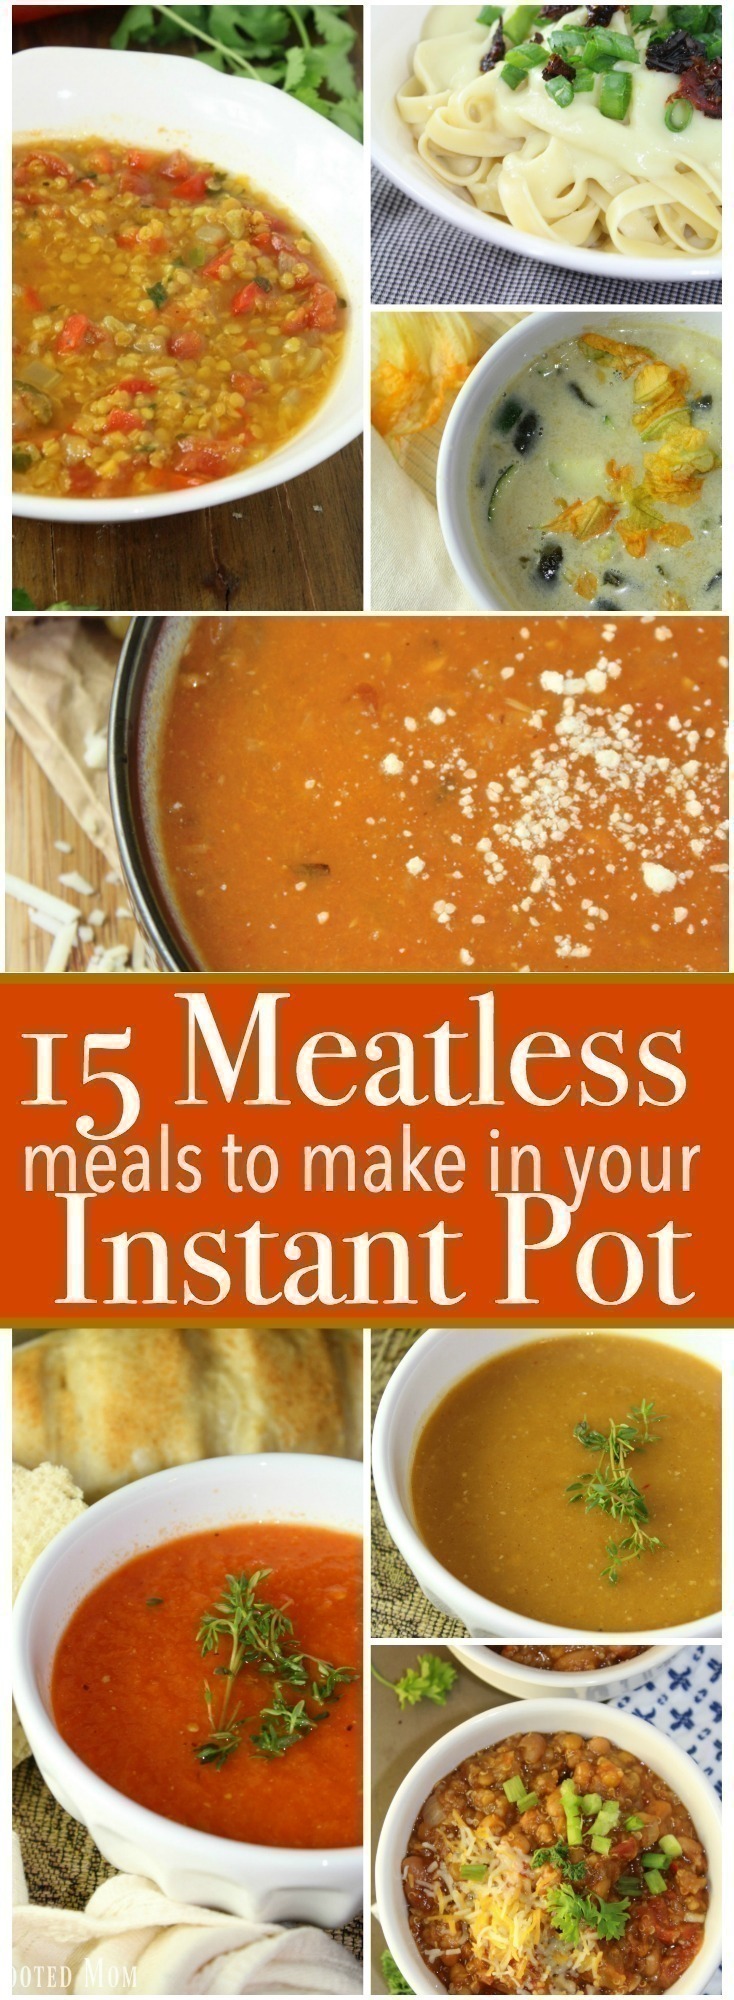 Sometimes we all need a little variety in our meals! Here are 15 easy Meatless Meals you can make in your Instant Pot.